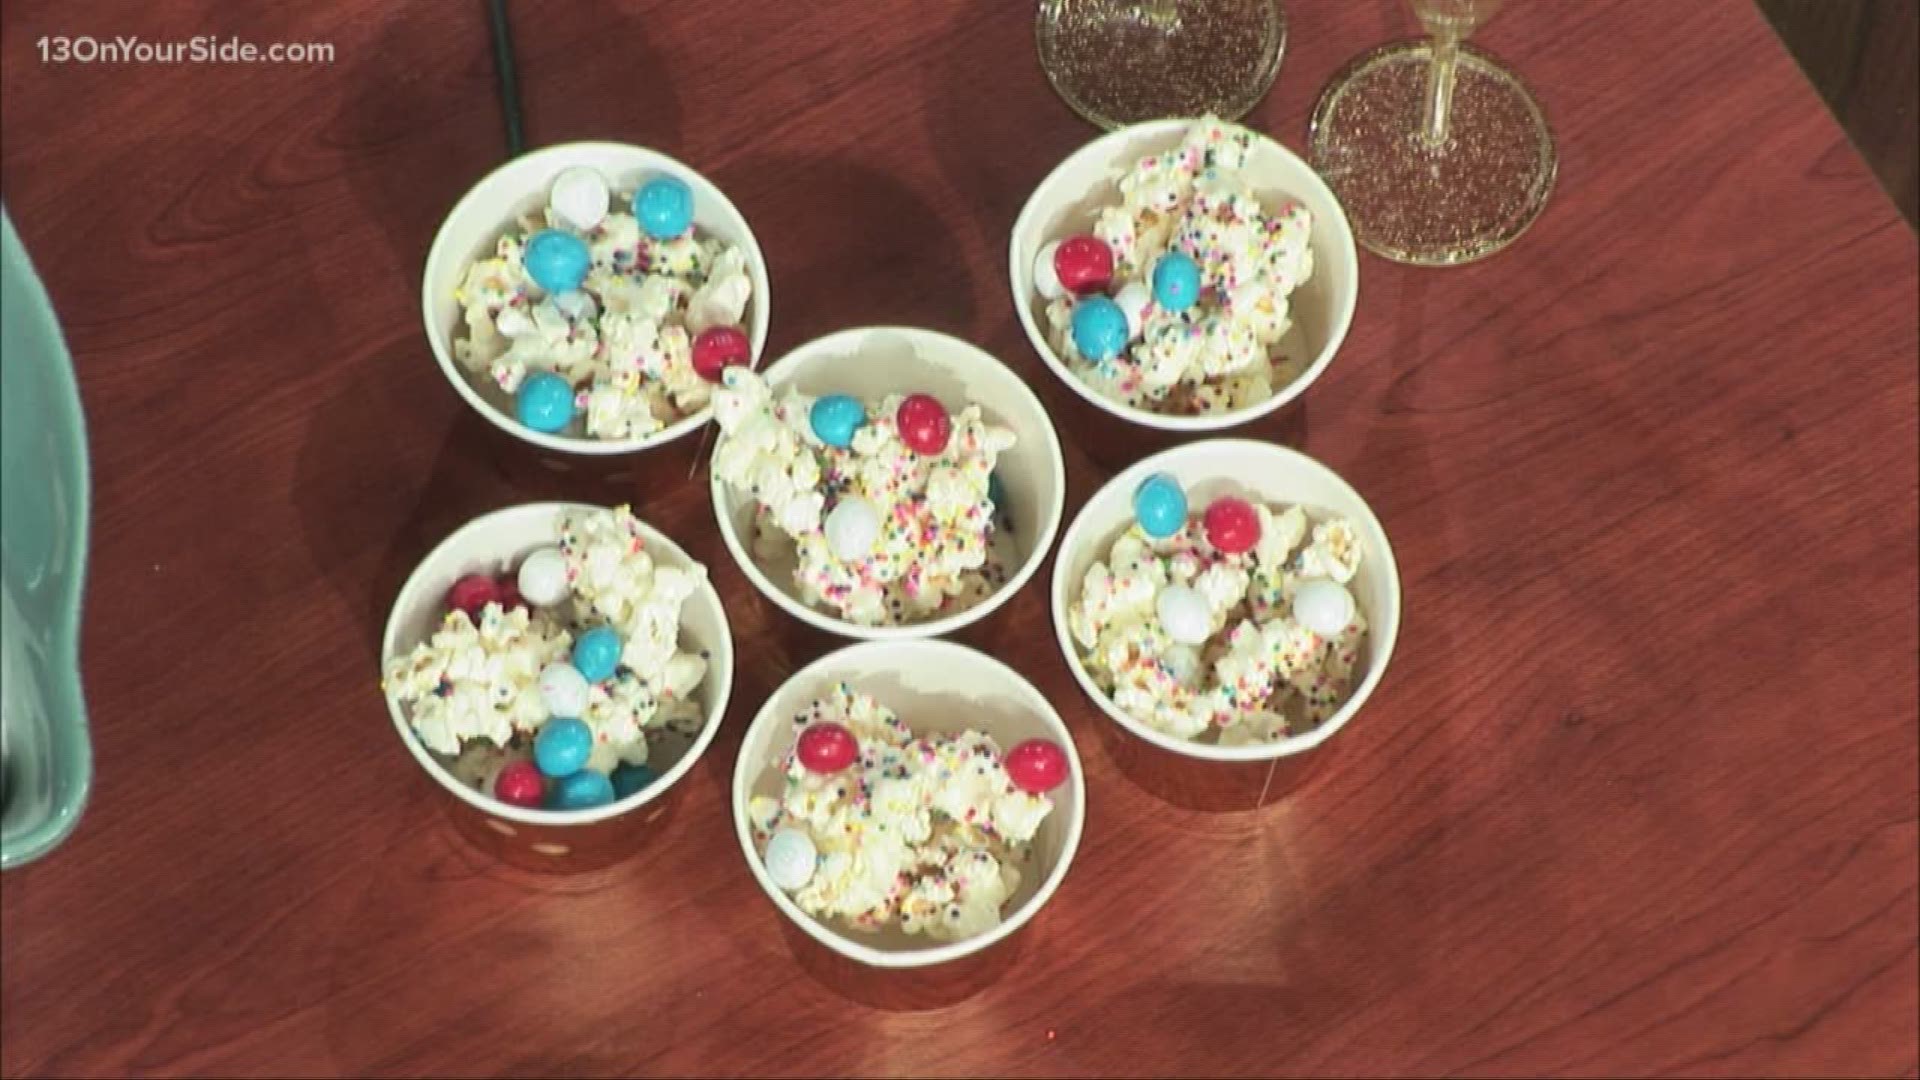 The 13 ON YOUR SIDE crew show off holiday-themed desserts you'll want to add to your menu.